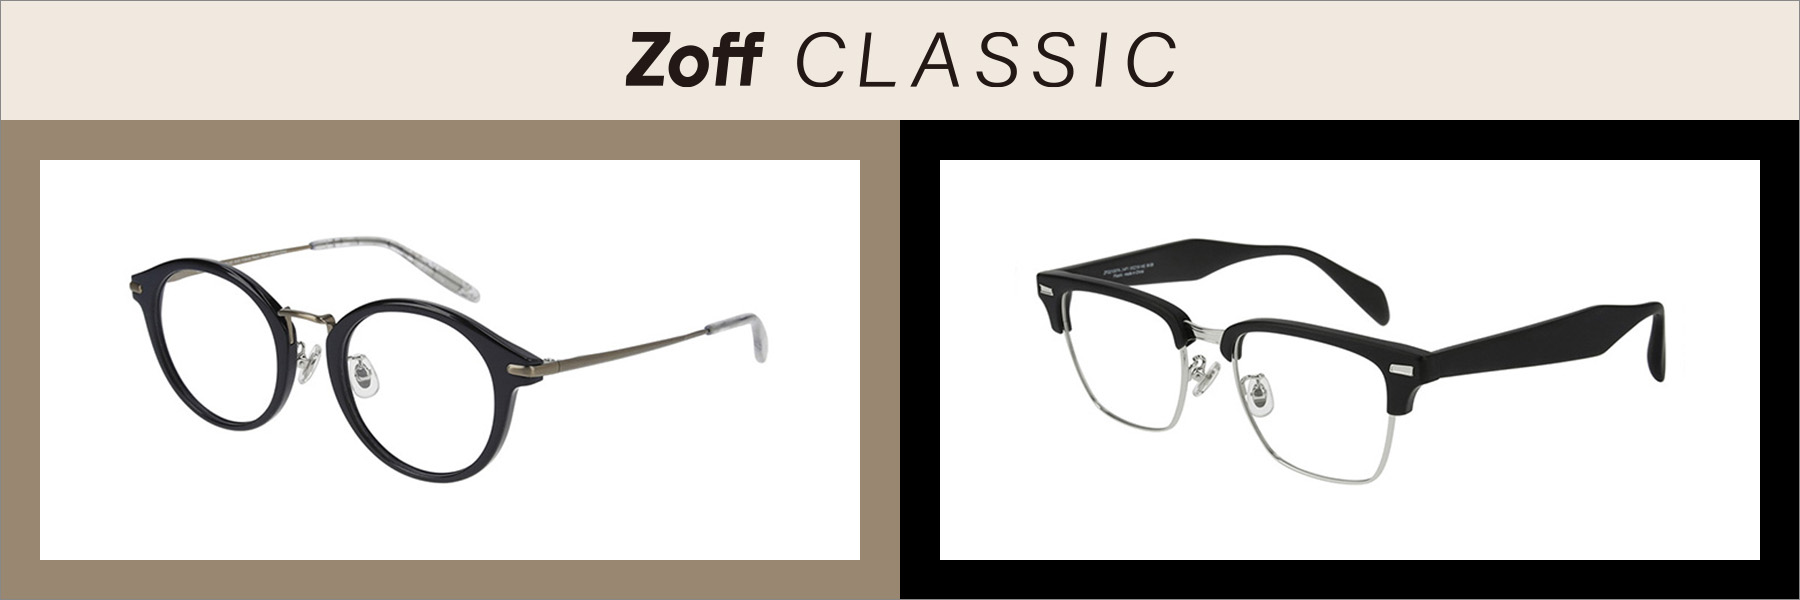 Zoff CLASSIC 2022 SPRING COLLECTION